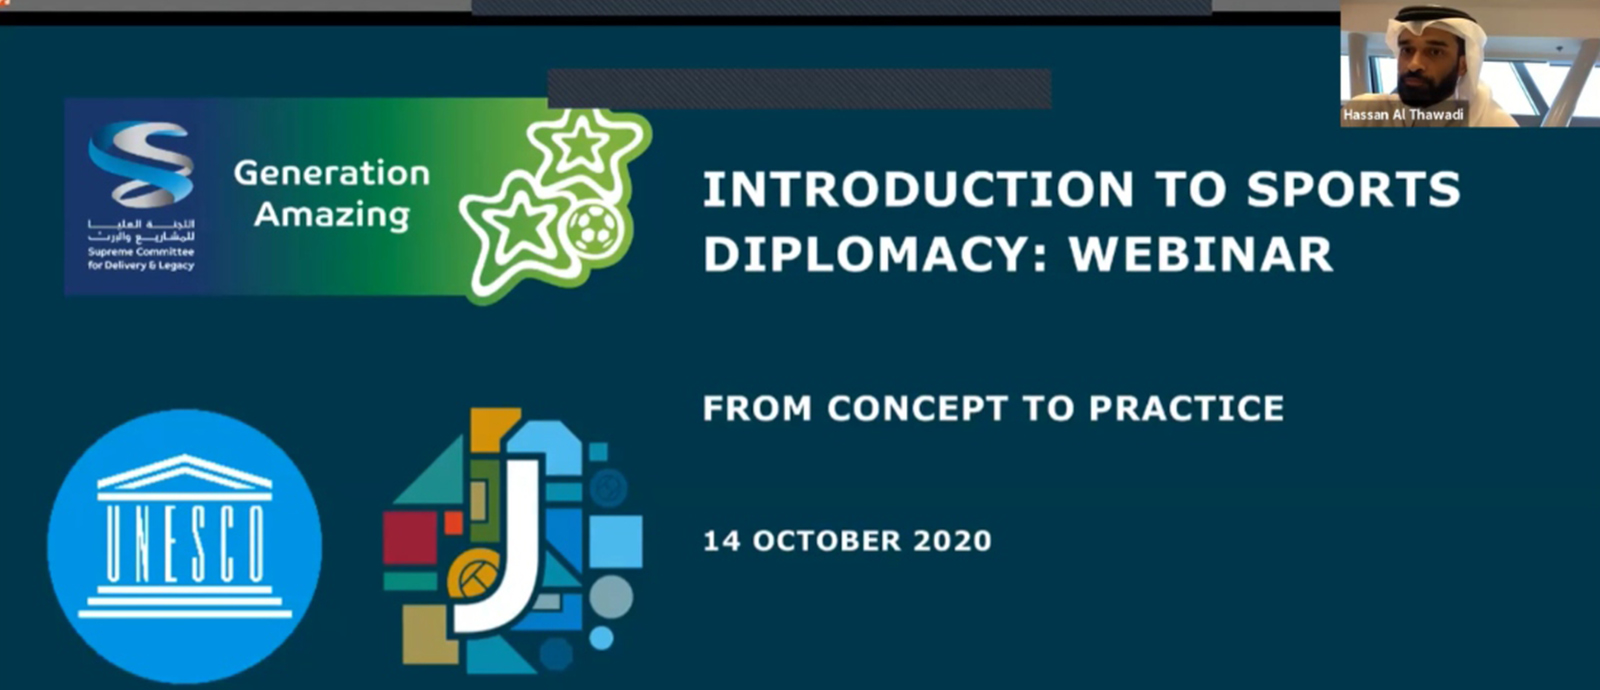 Webinar titled ‘Introduction to Sports Diplomacy: From Concept to Practice’